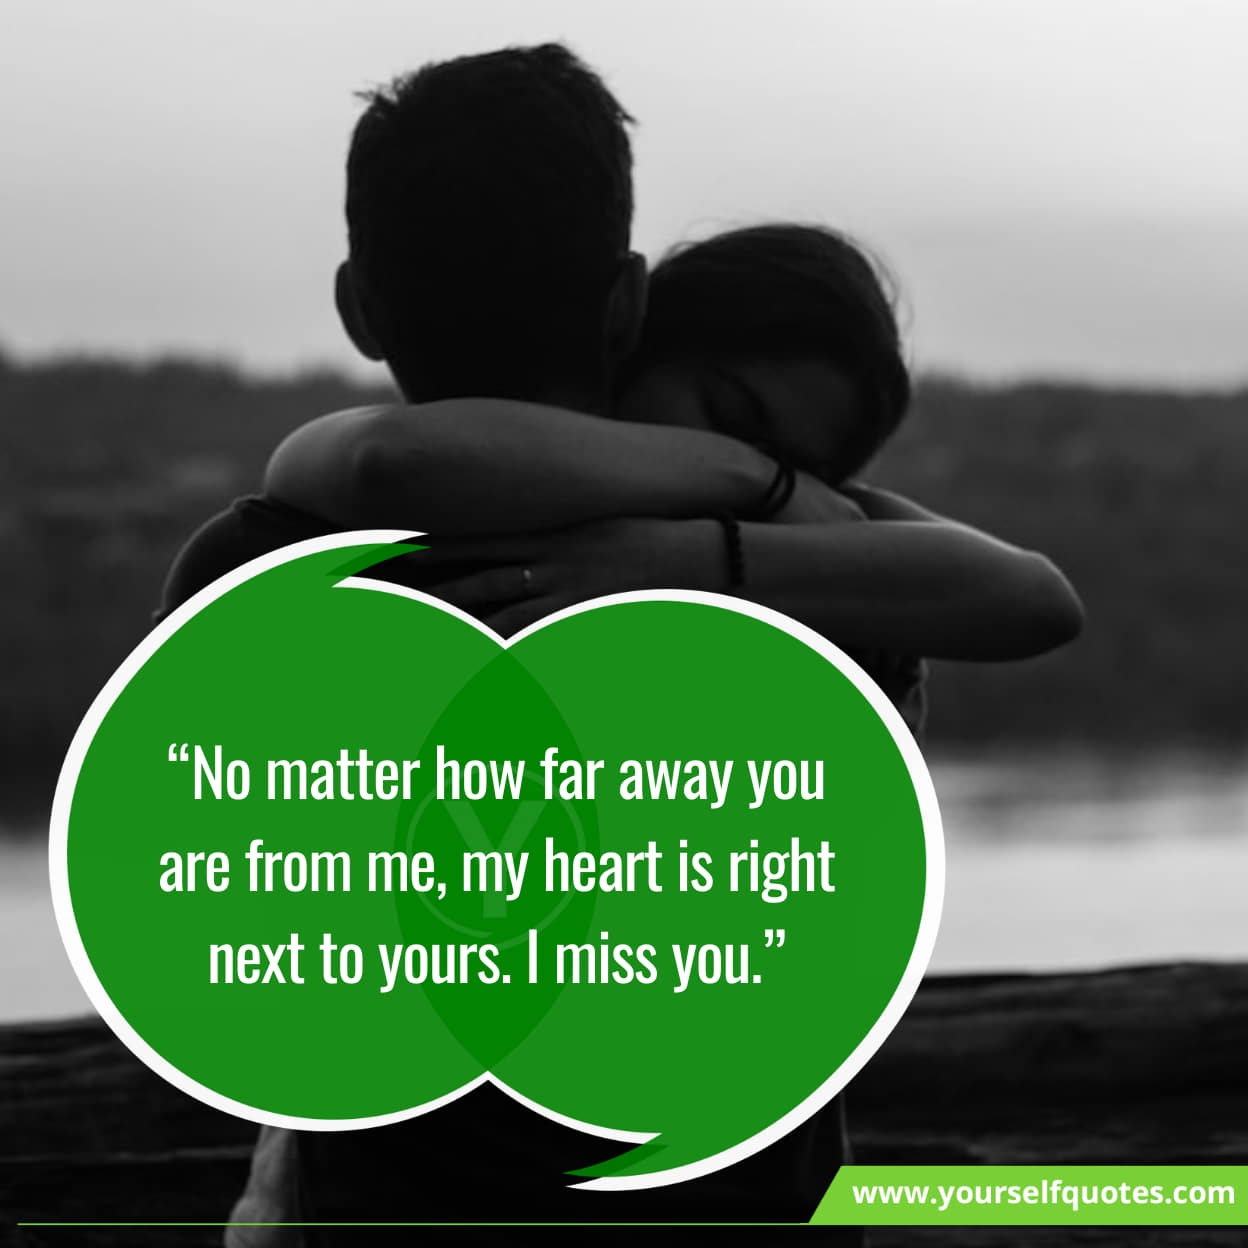 Latest Long-Distance Relationship Quotes for Her